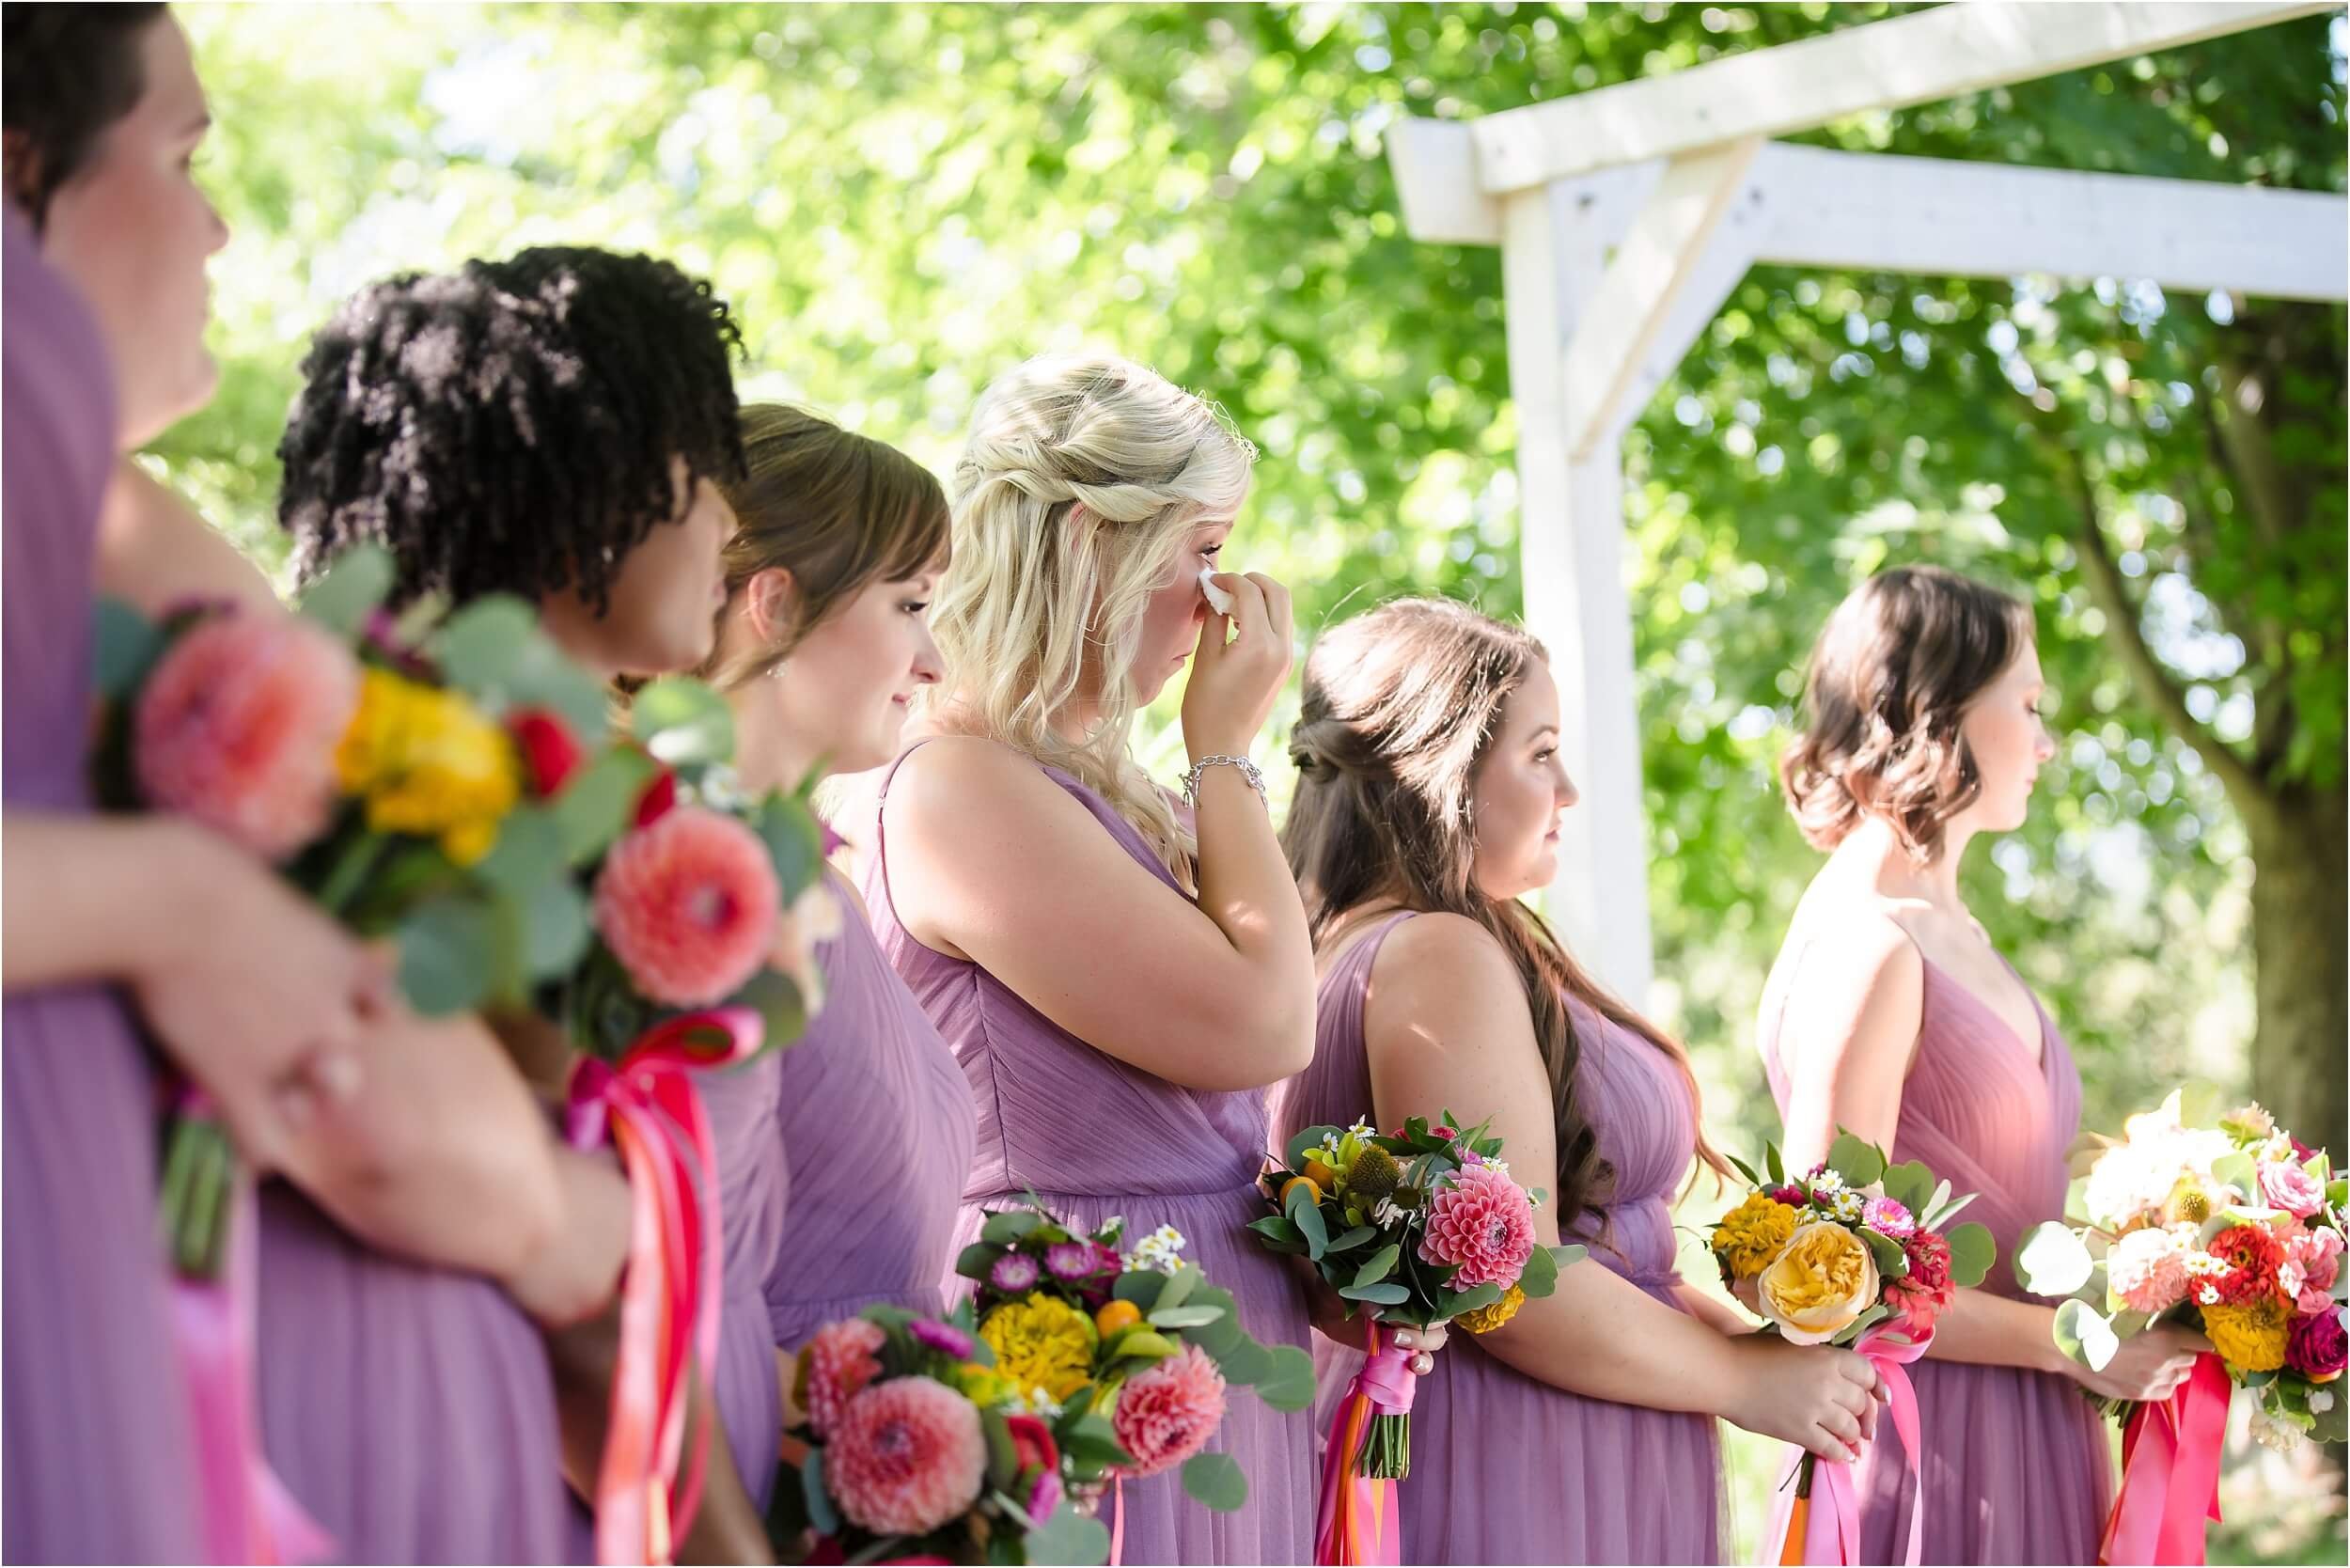  A bridesmaid dabs her eyes during her friends’ wedding ceremony.  